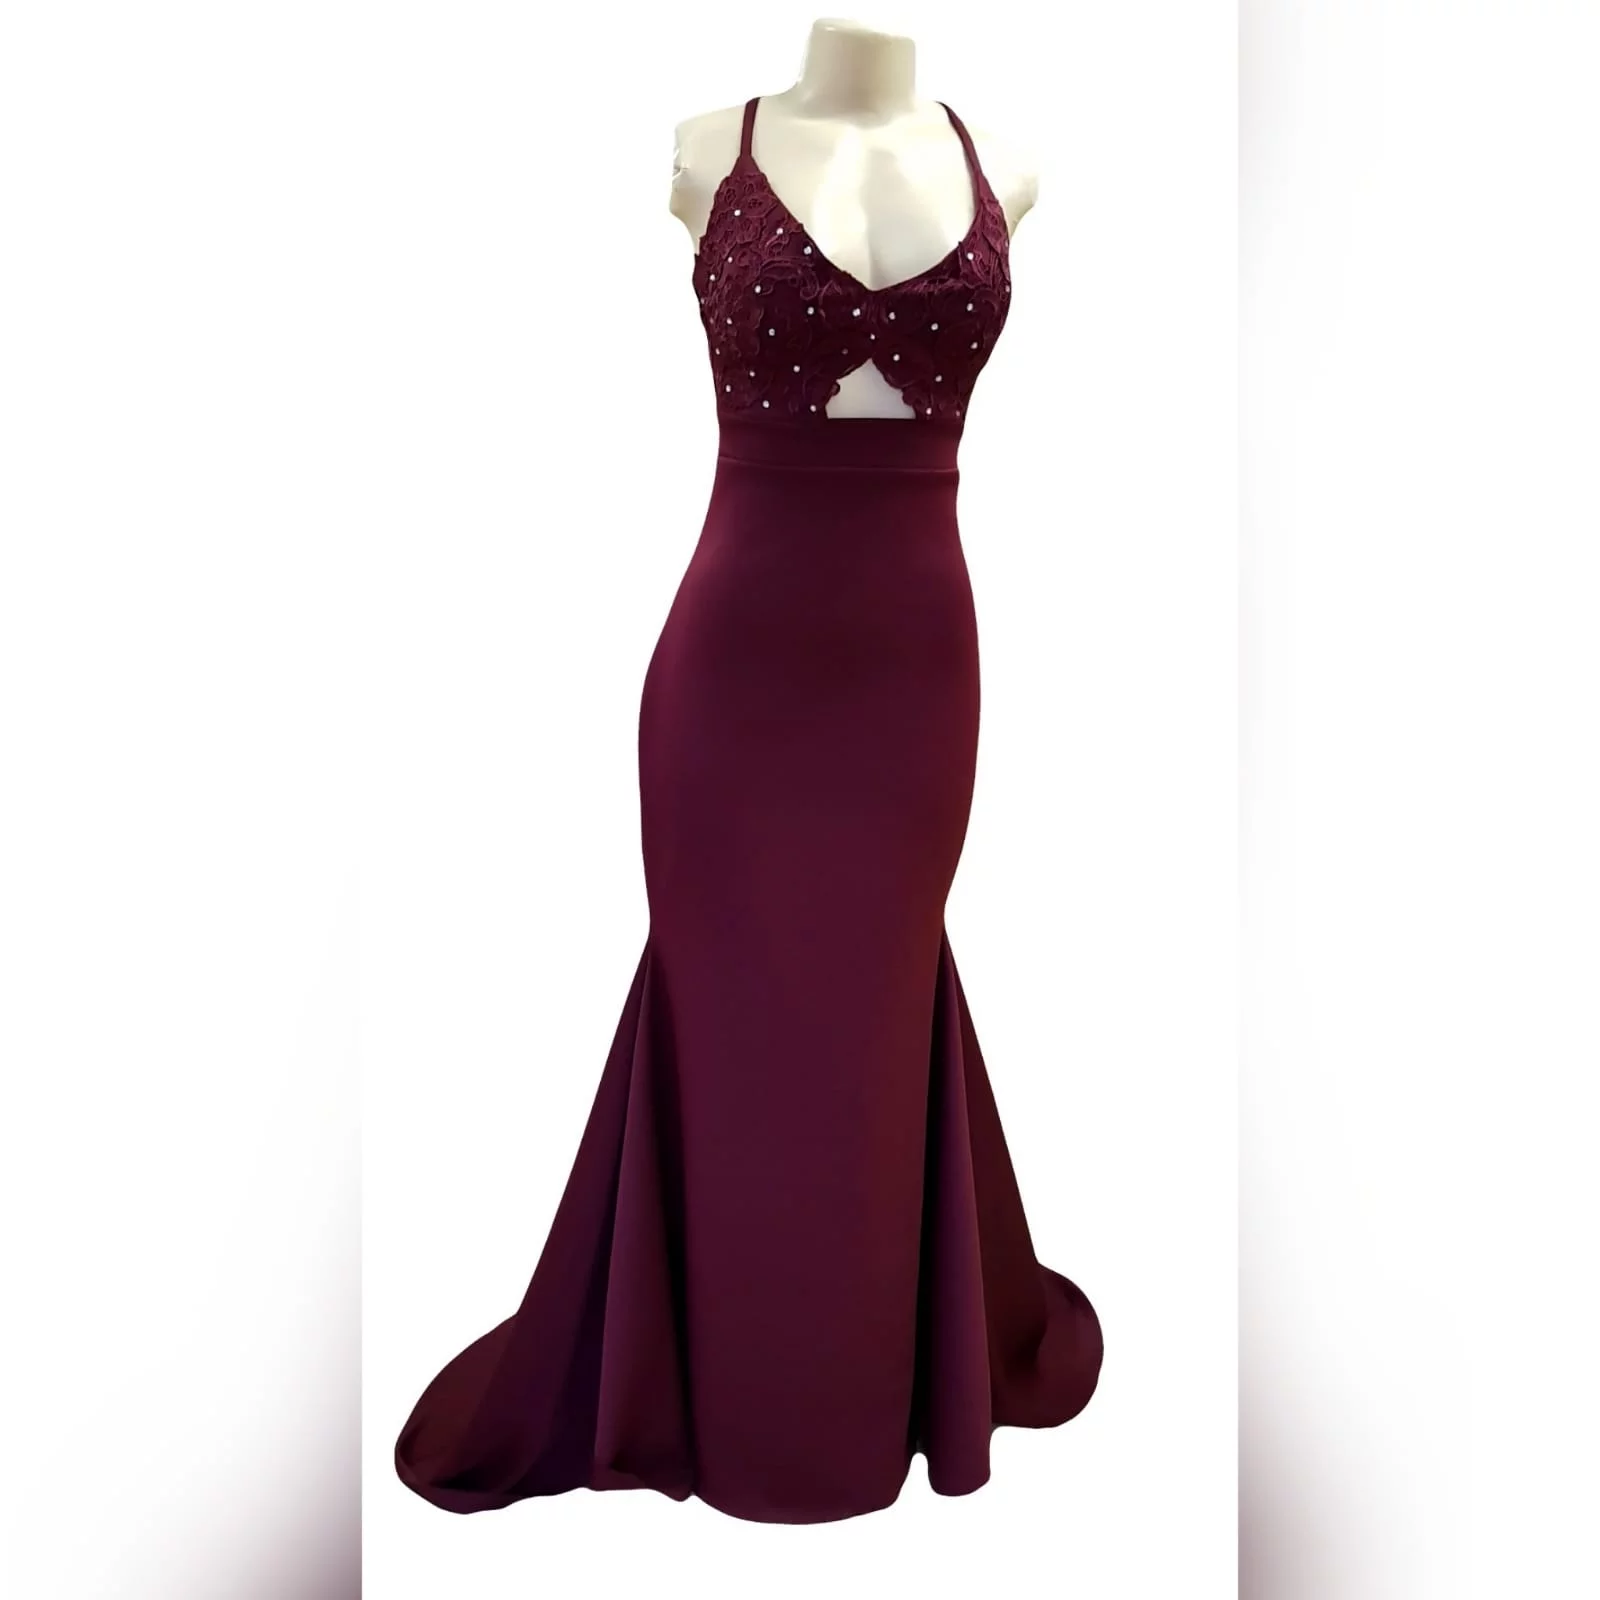 Burgundy soft mermaid plus size prom dress 7 burgundy soft mermaid plus size prom dress. Bodice detailed with lace and silver beads, small triangle opening on the waist with waistband finish. Open laceup back and a train.